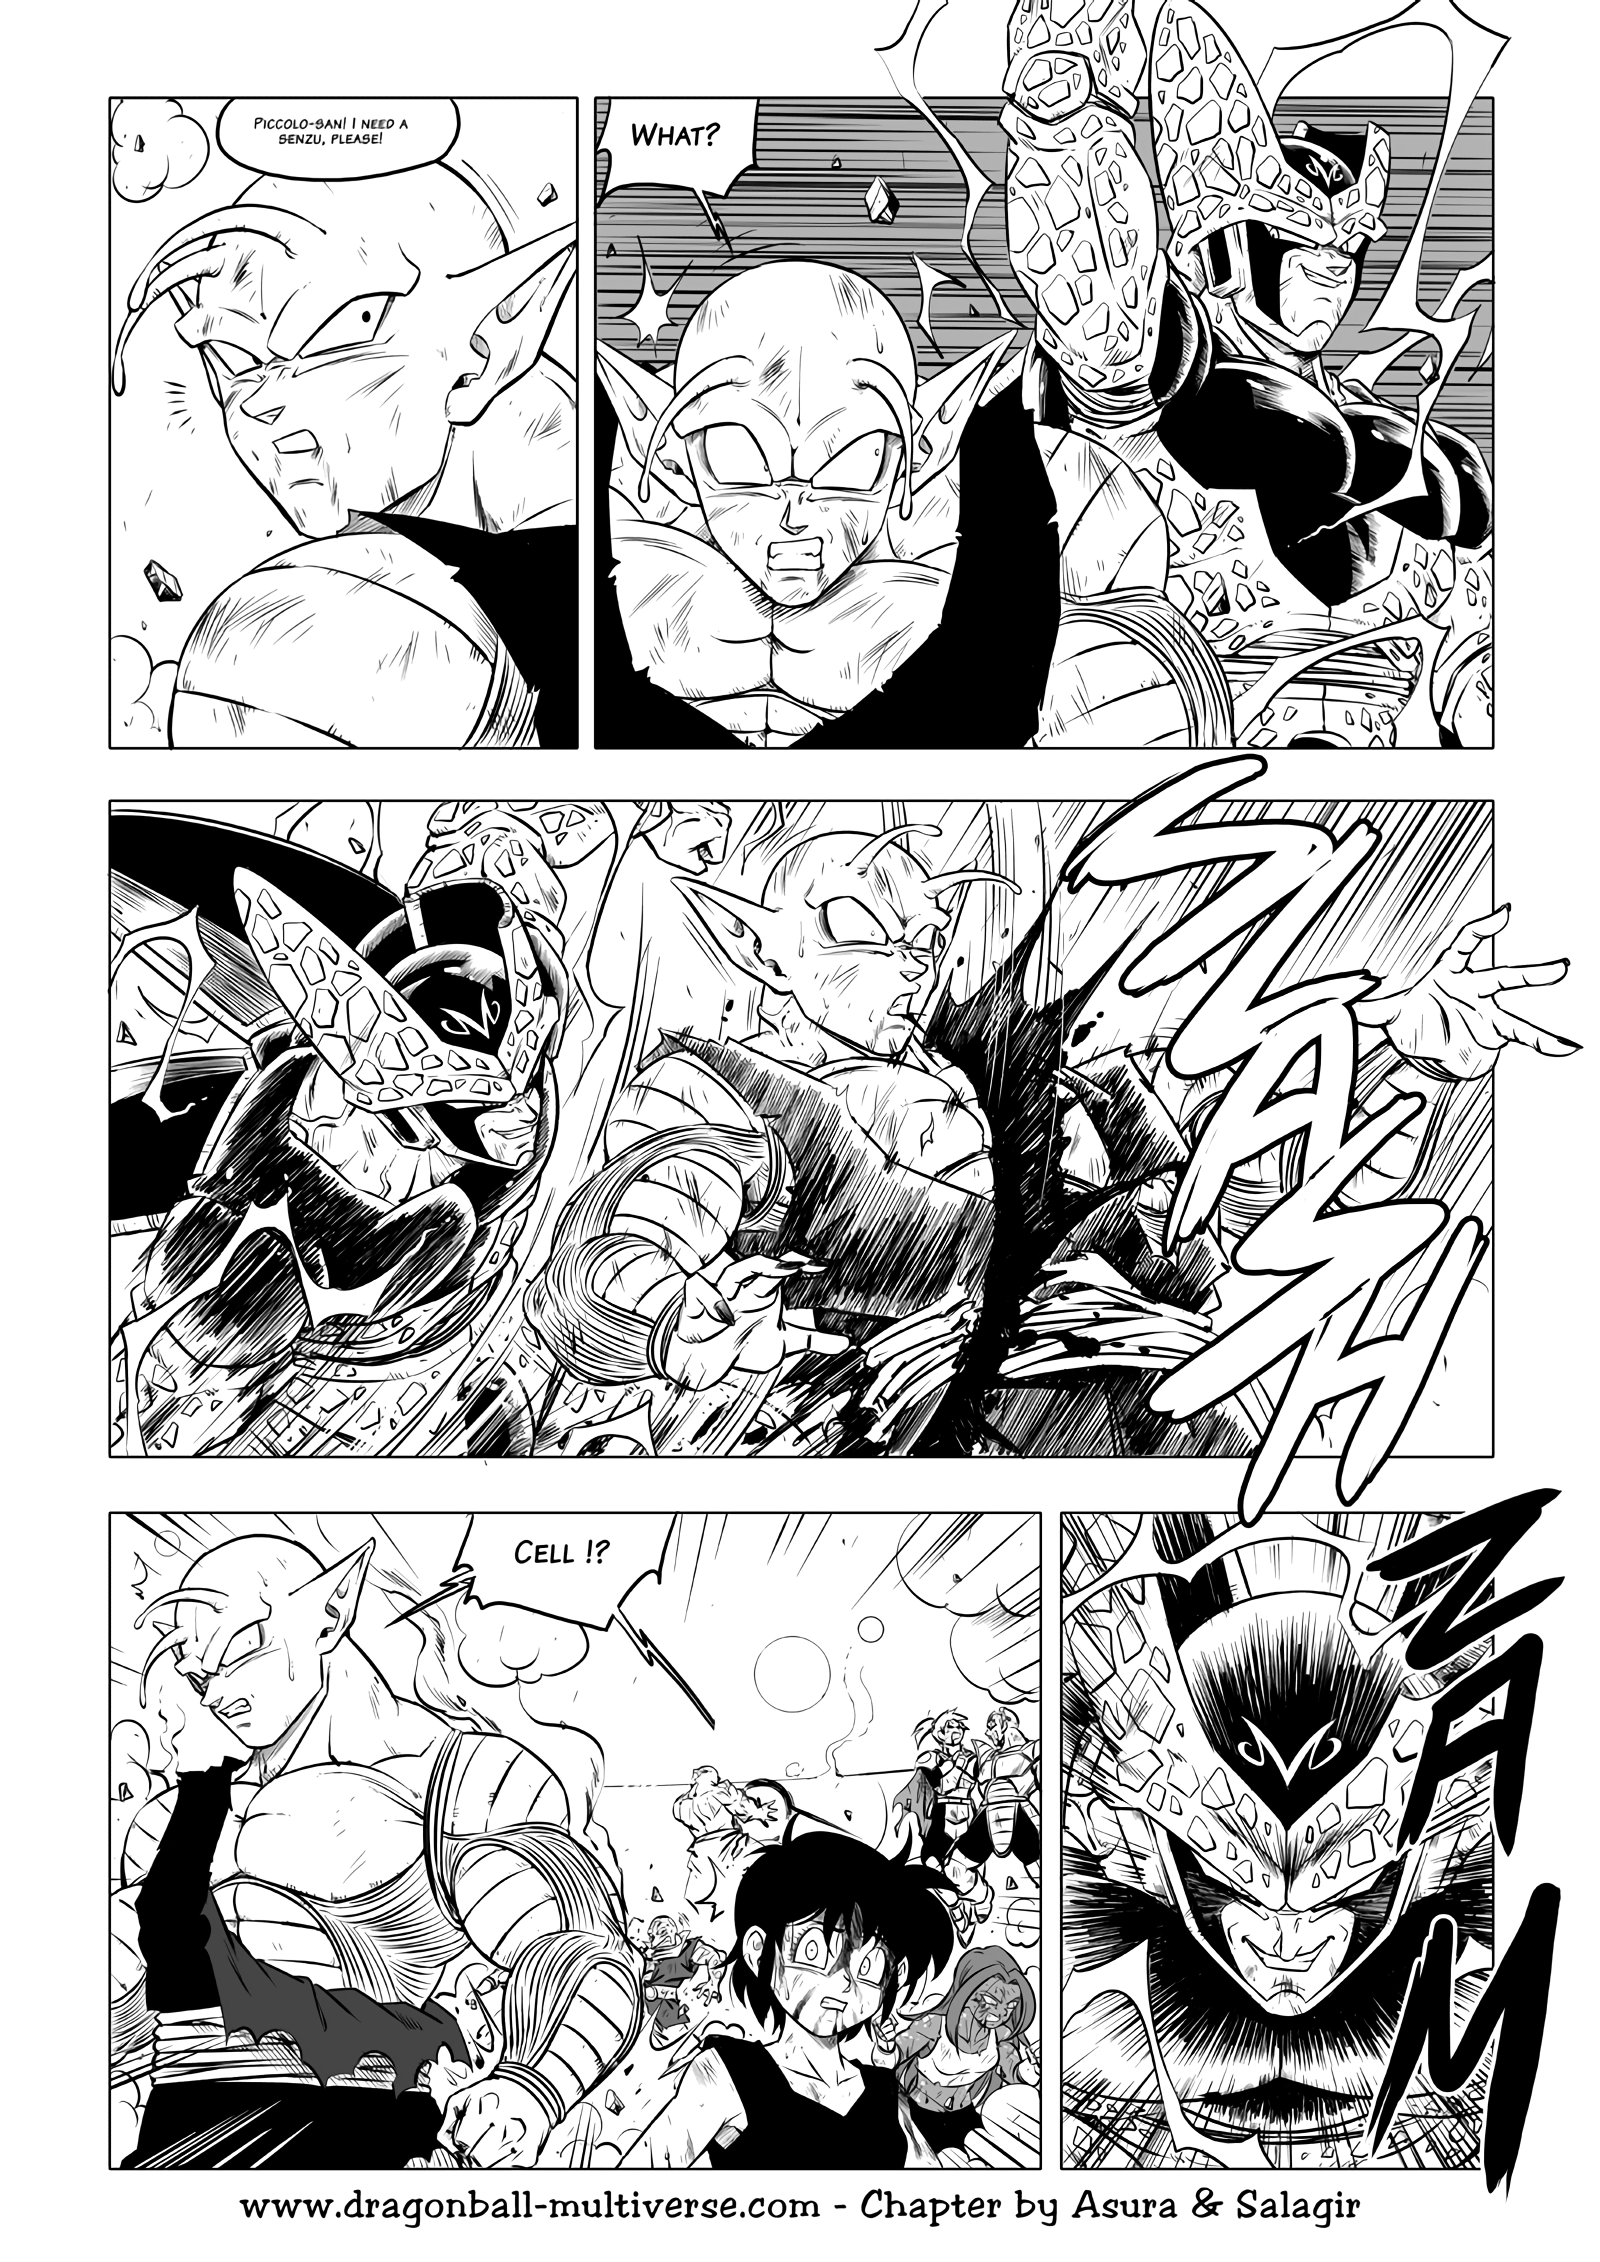 Universe 1 - How it all began - Chapter 83, Page 1917 - DBMultiverse